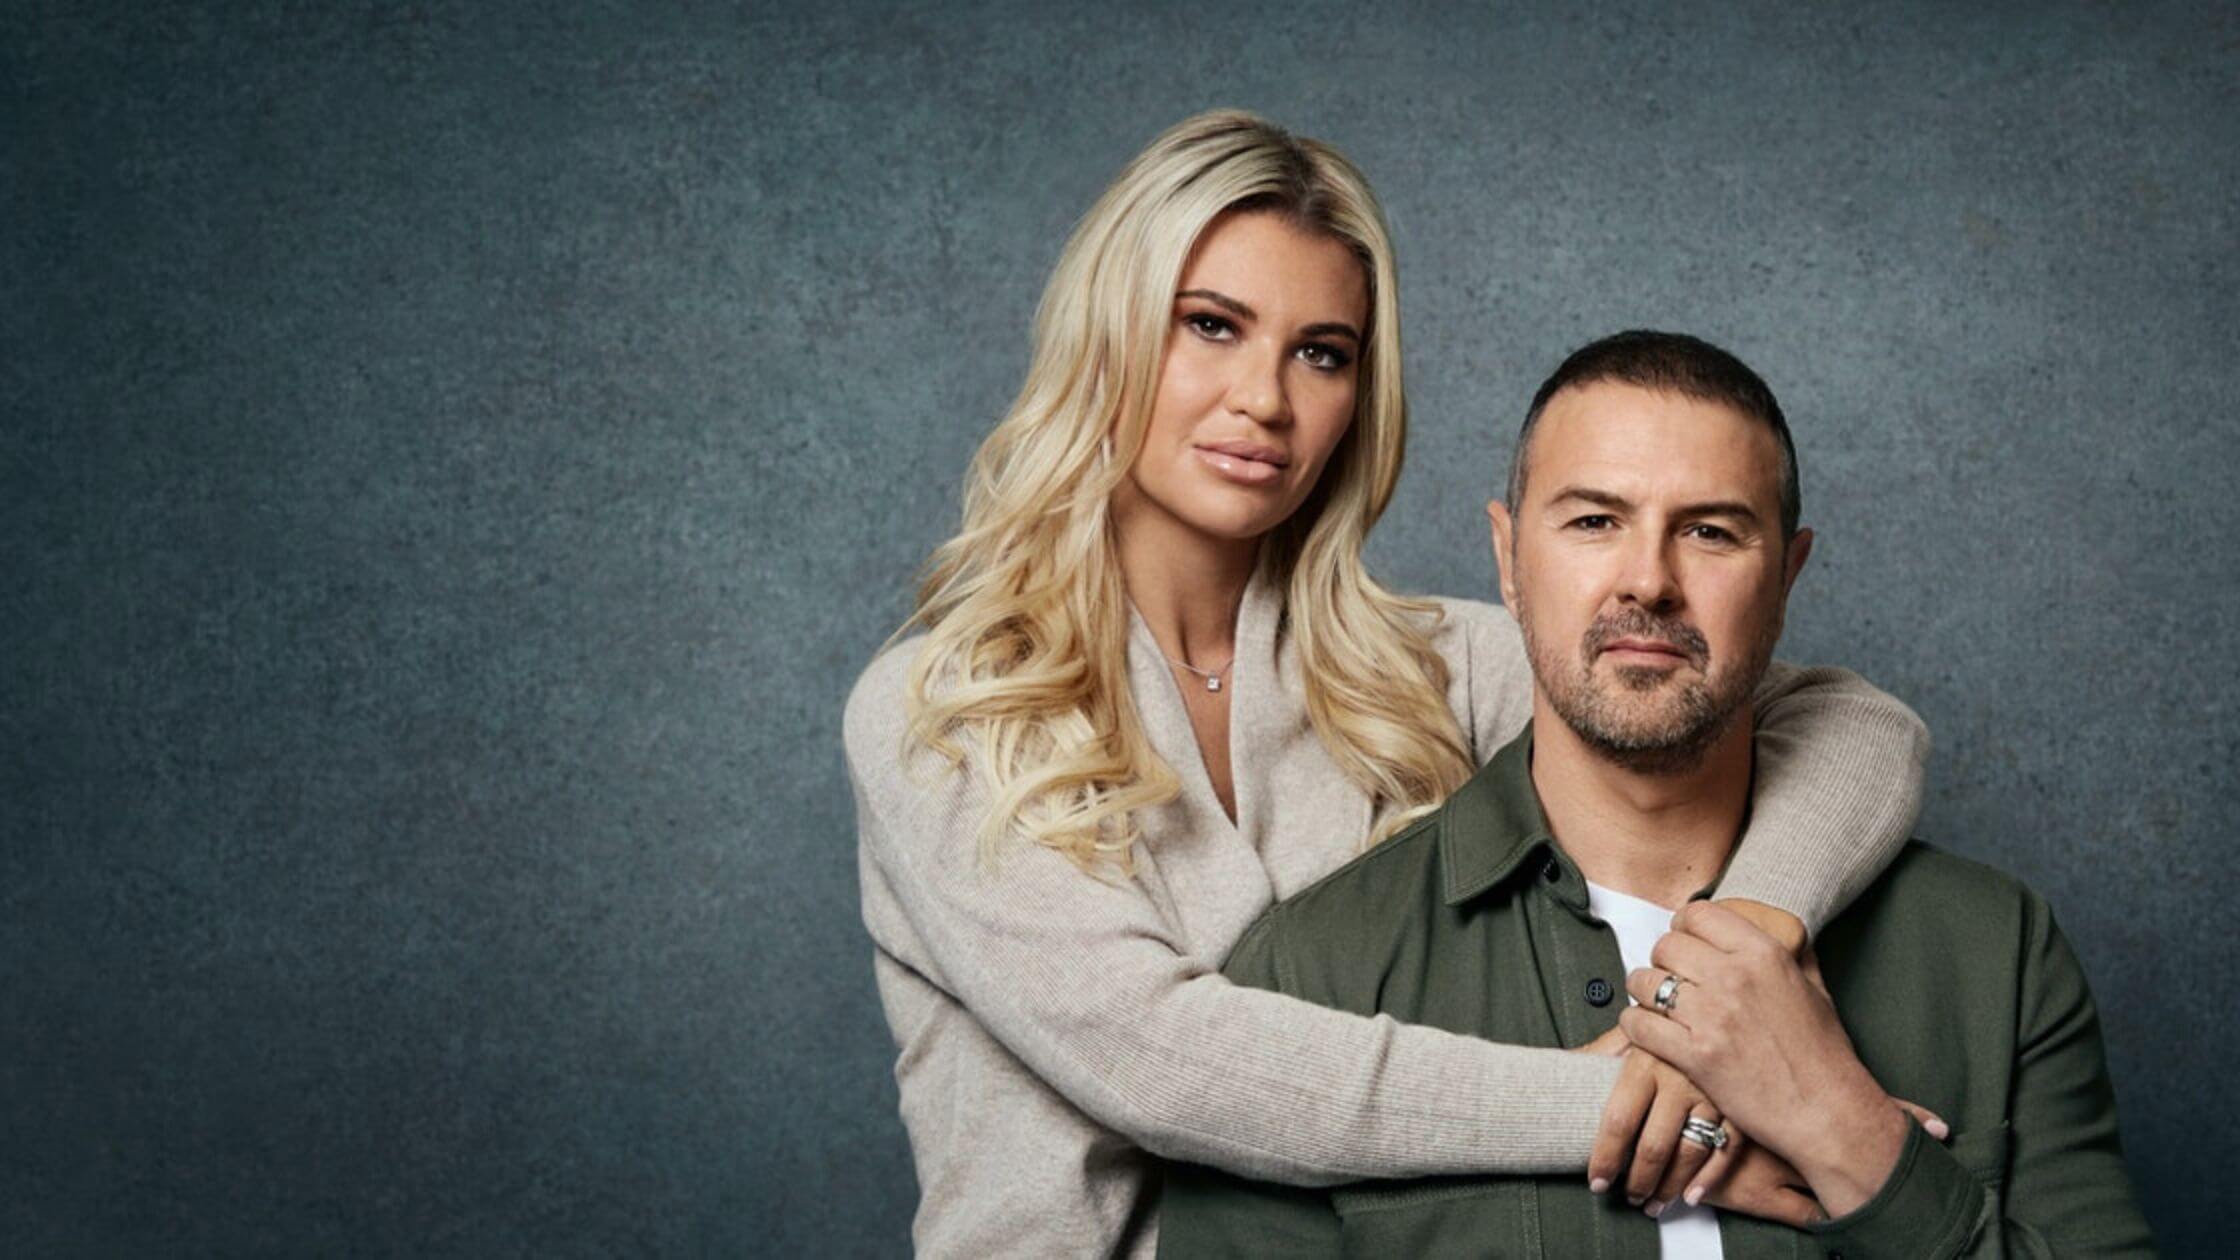 Paddy McGuinness Returns Home After Issue With His Wife